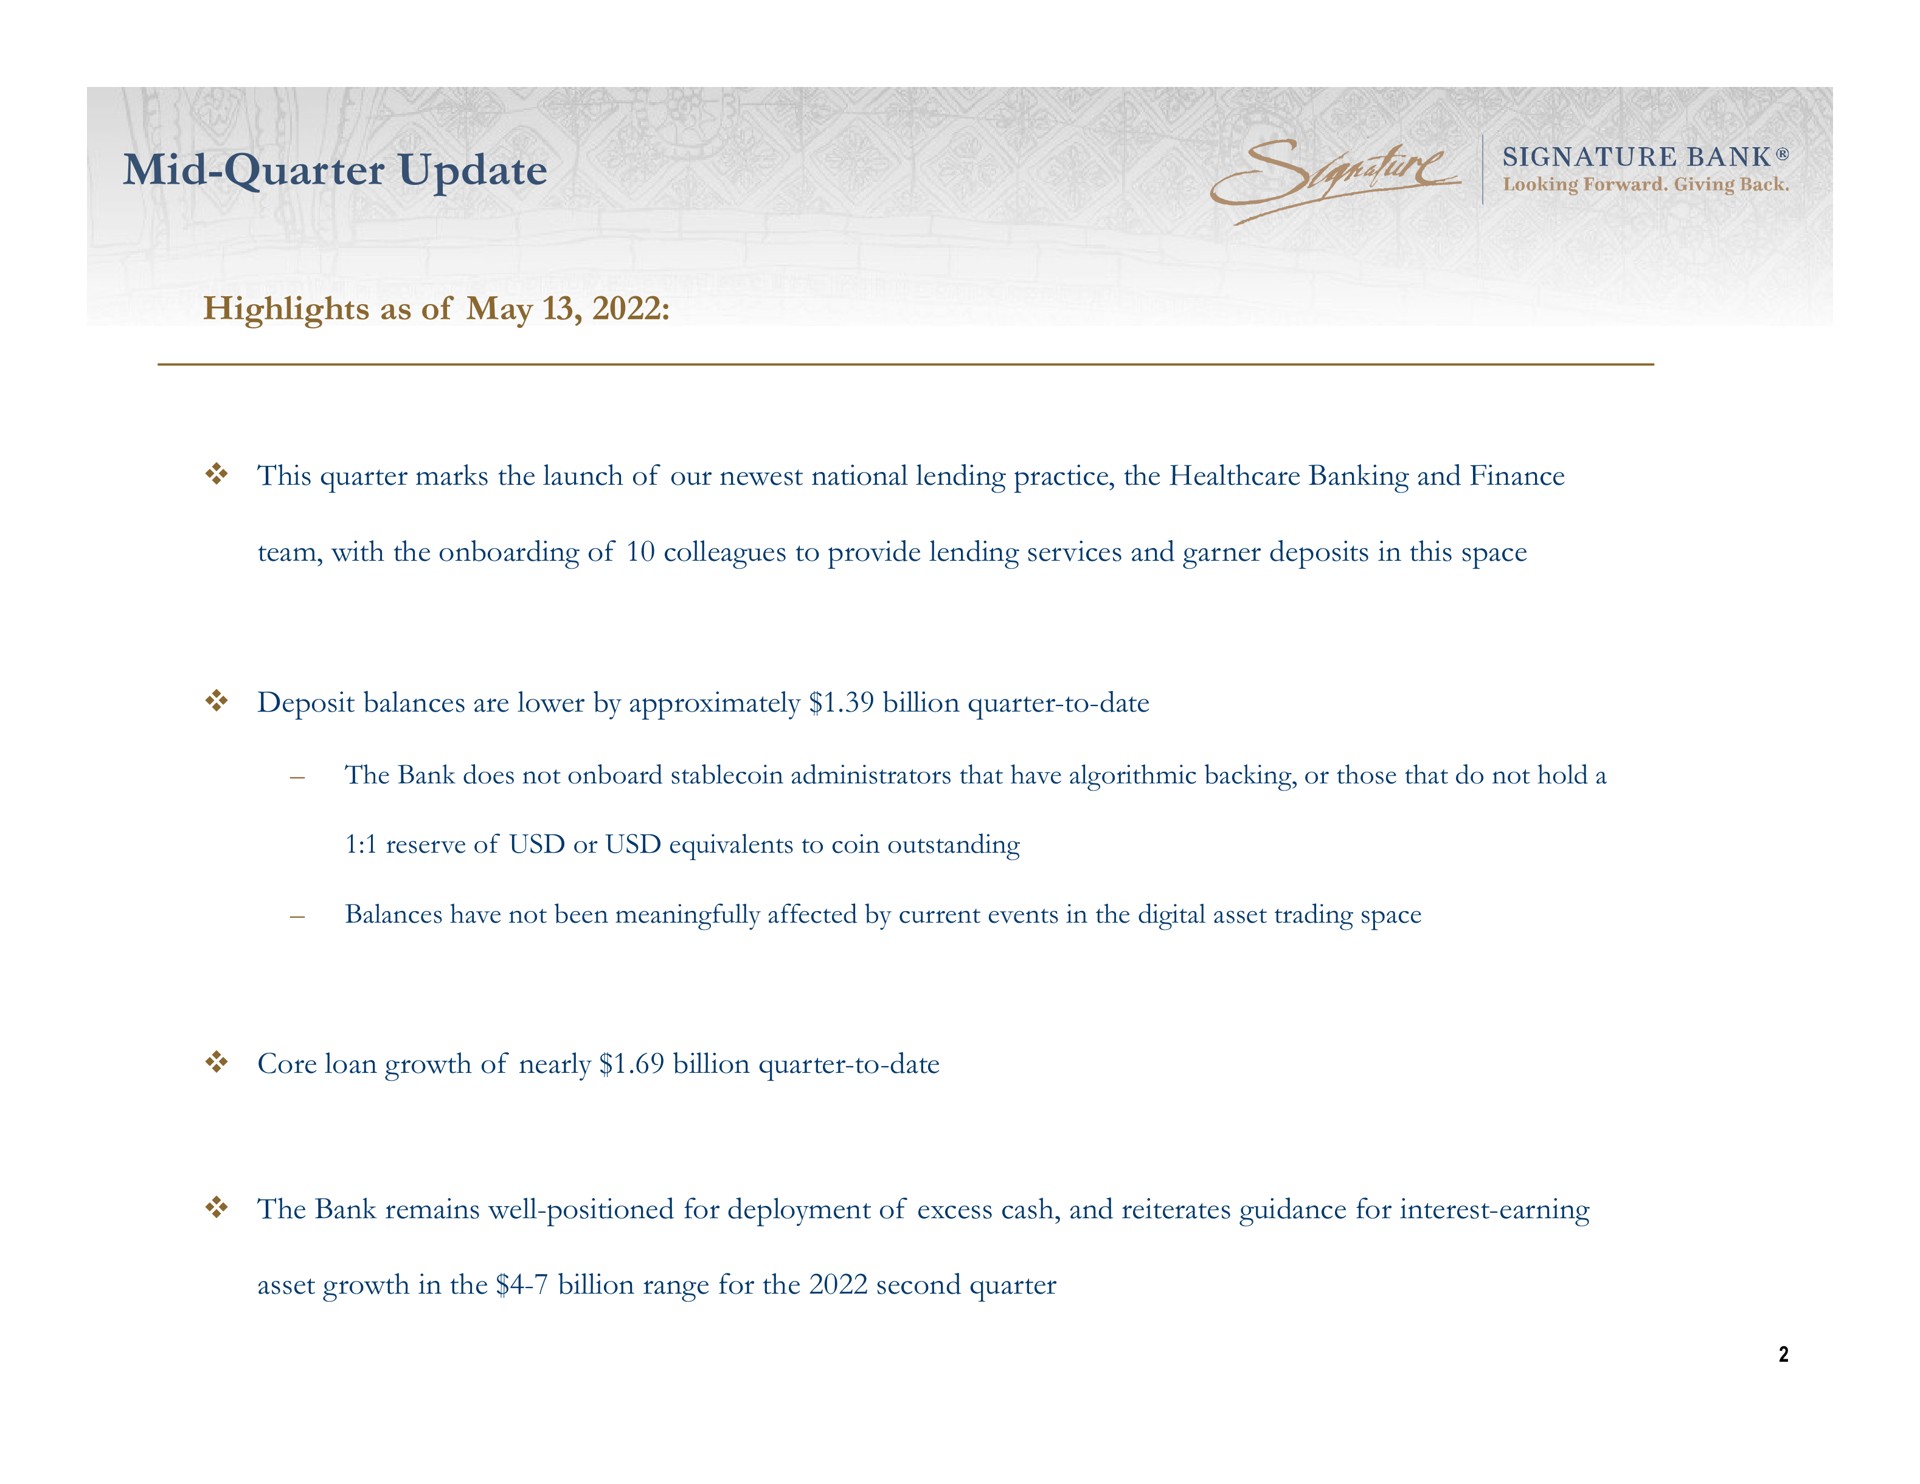 mid quarter update see highlights as of may | Signature Bank